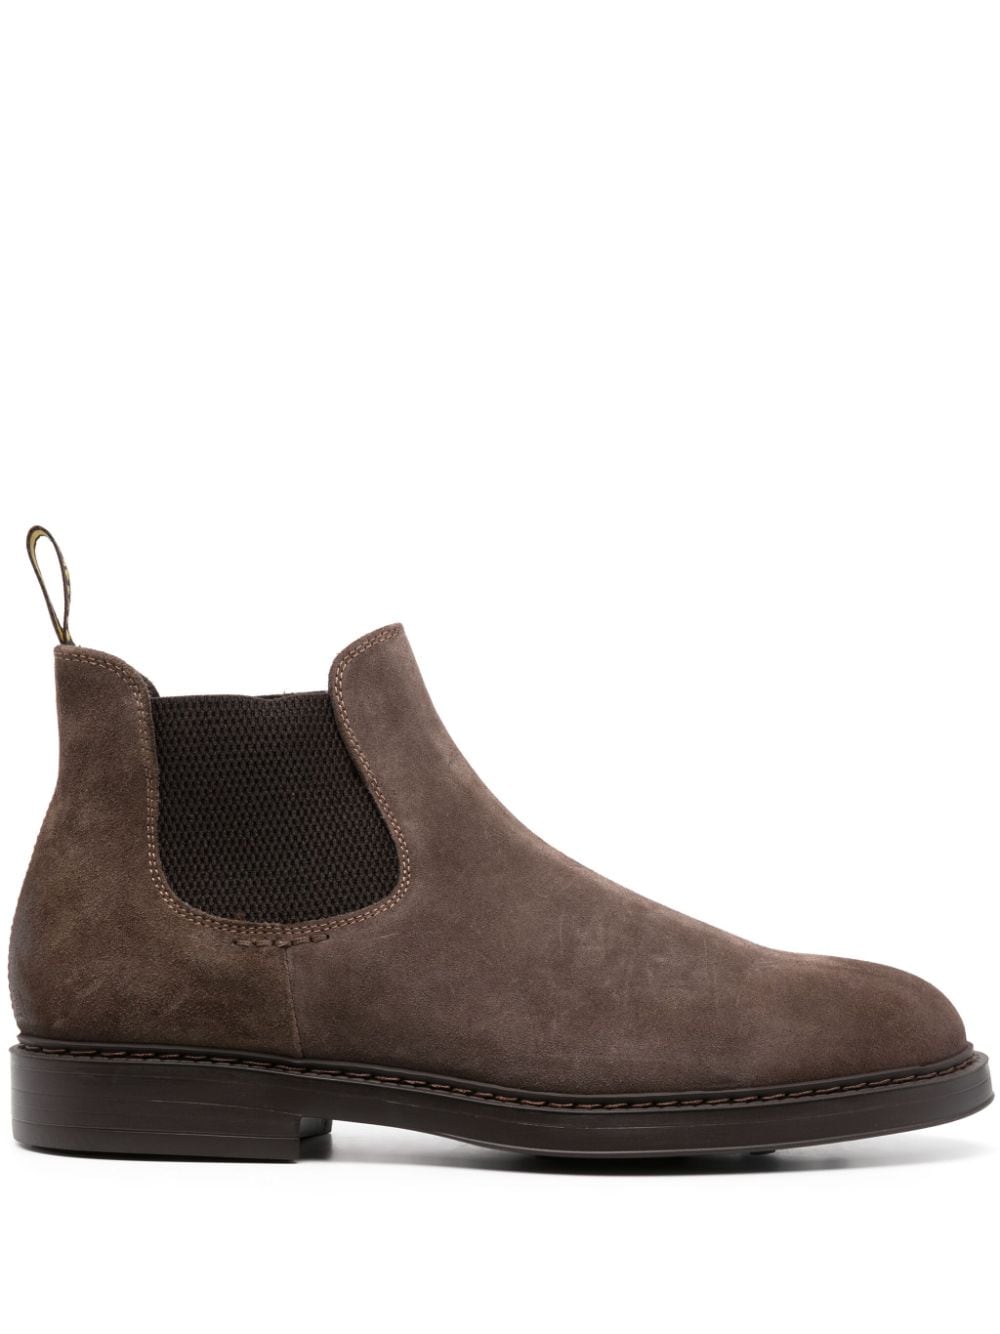 Doucal's slip-on suede Chelsea boots - Grey von Doucal's